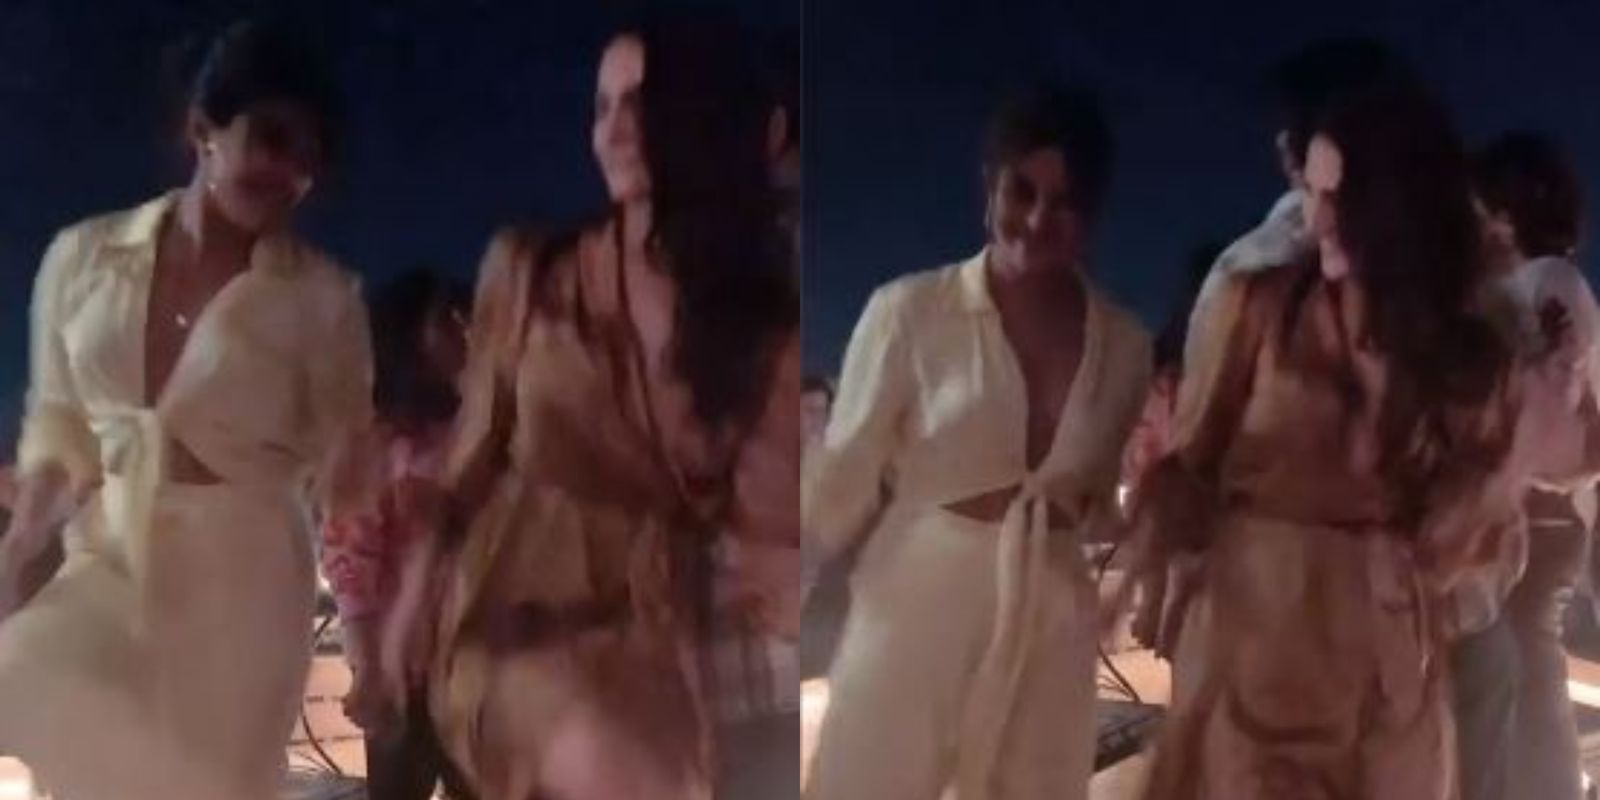 Priyanka Chopra Matches Vaani Kapoor Step For Step As They Dance Together On Ghungroo, The Latter Says 'Ain’t No One Like You PC'